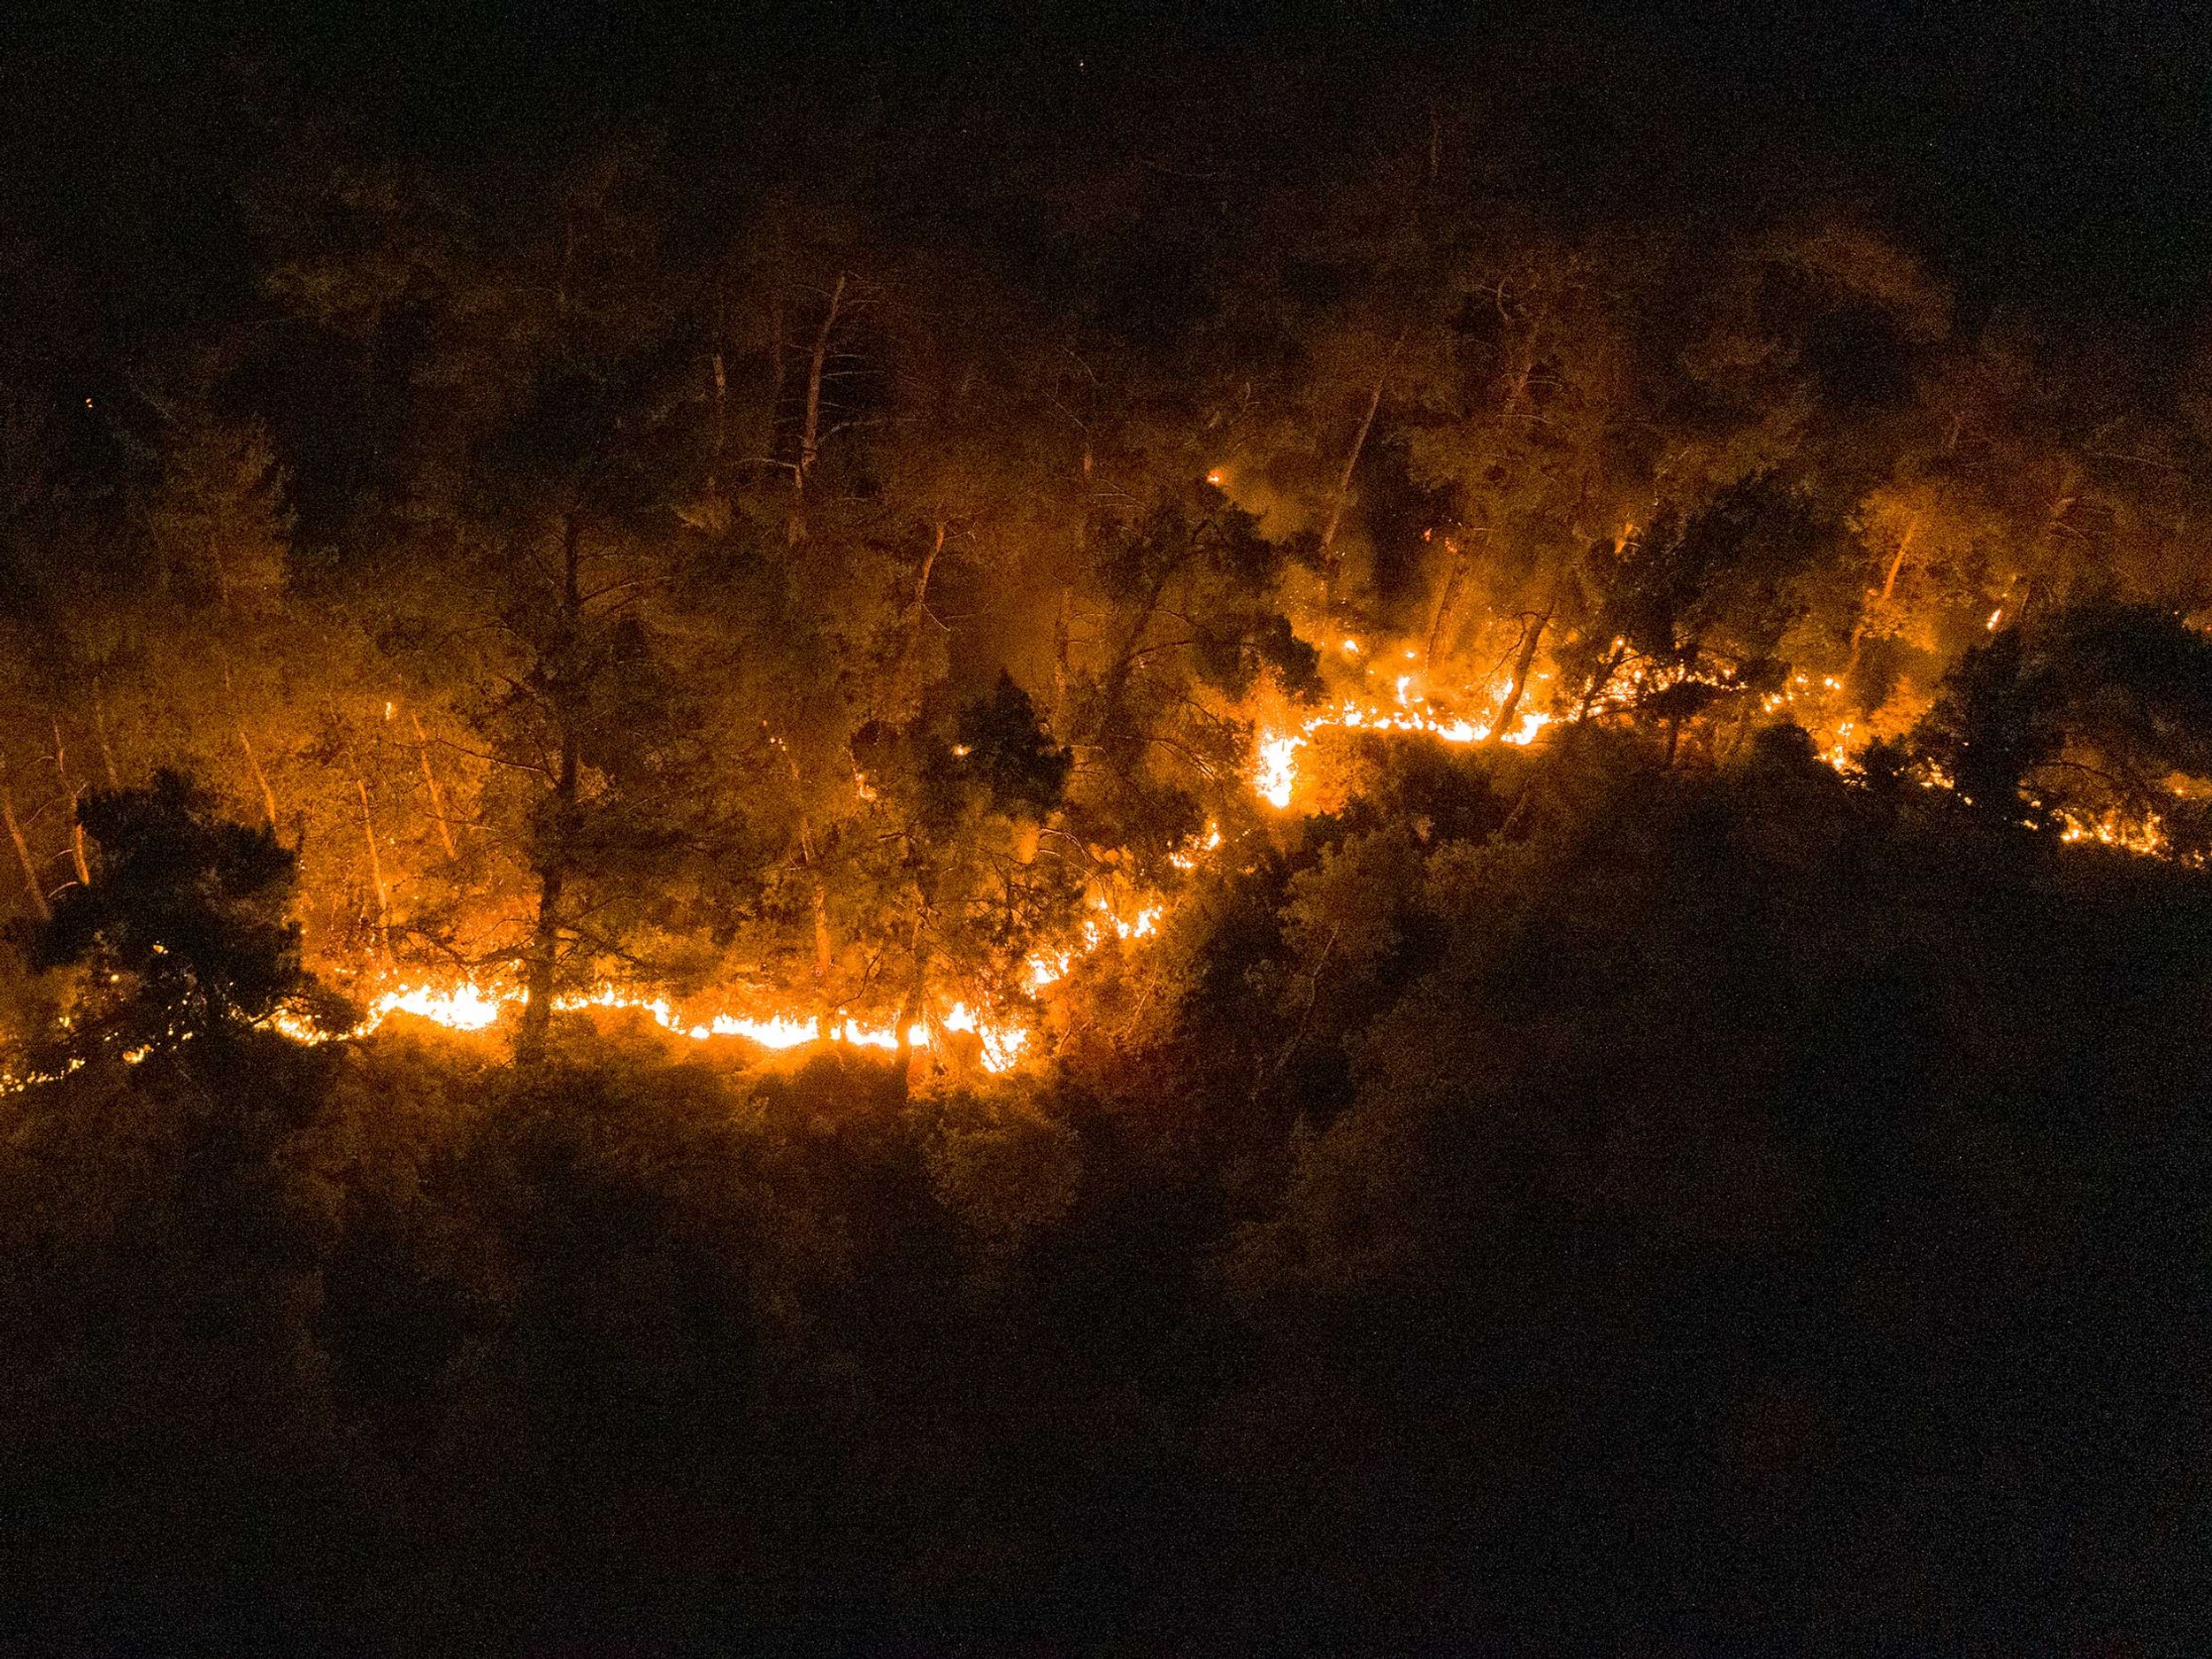 A drone photo shows the wildfire in Menderes district of Izmir, Turkey on August 01, 2020.